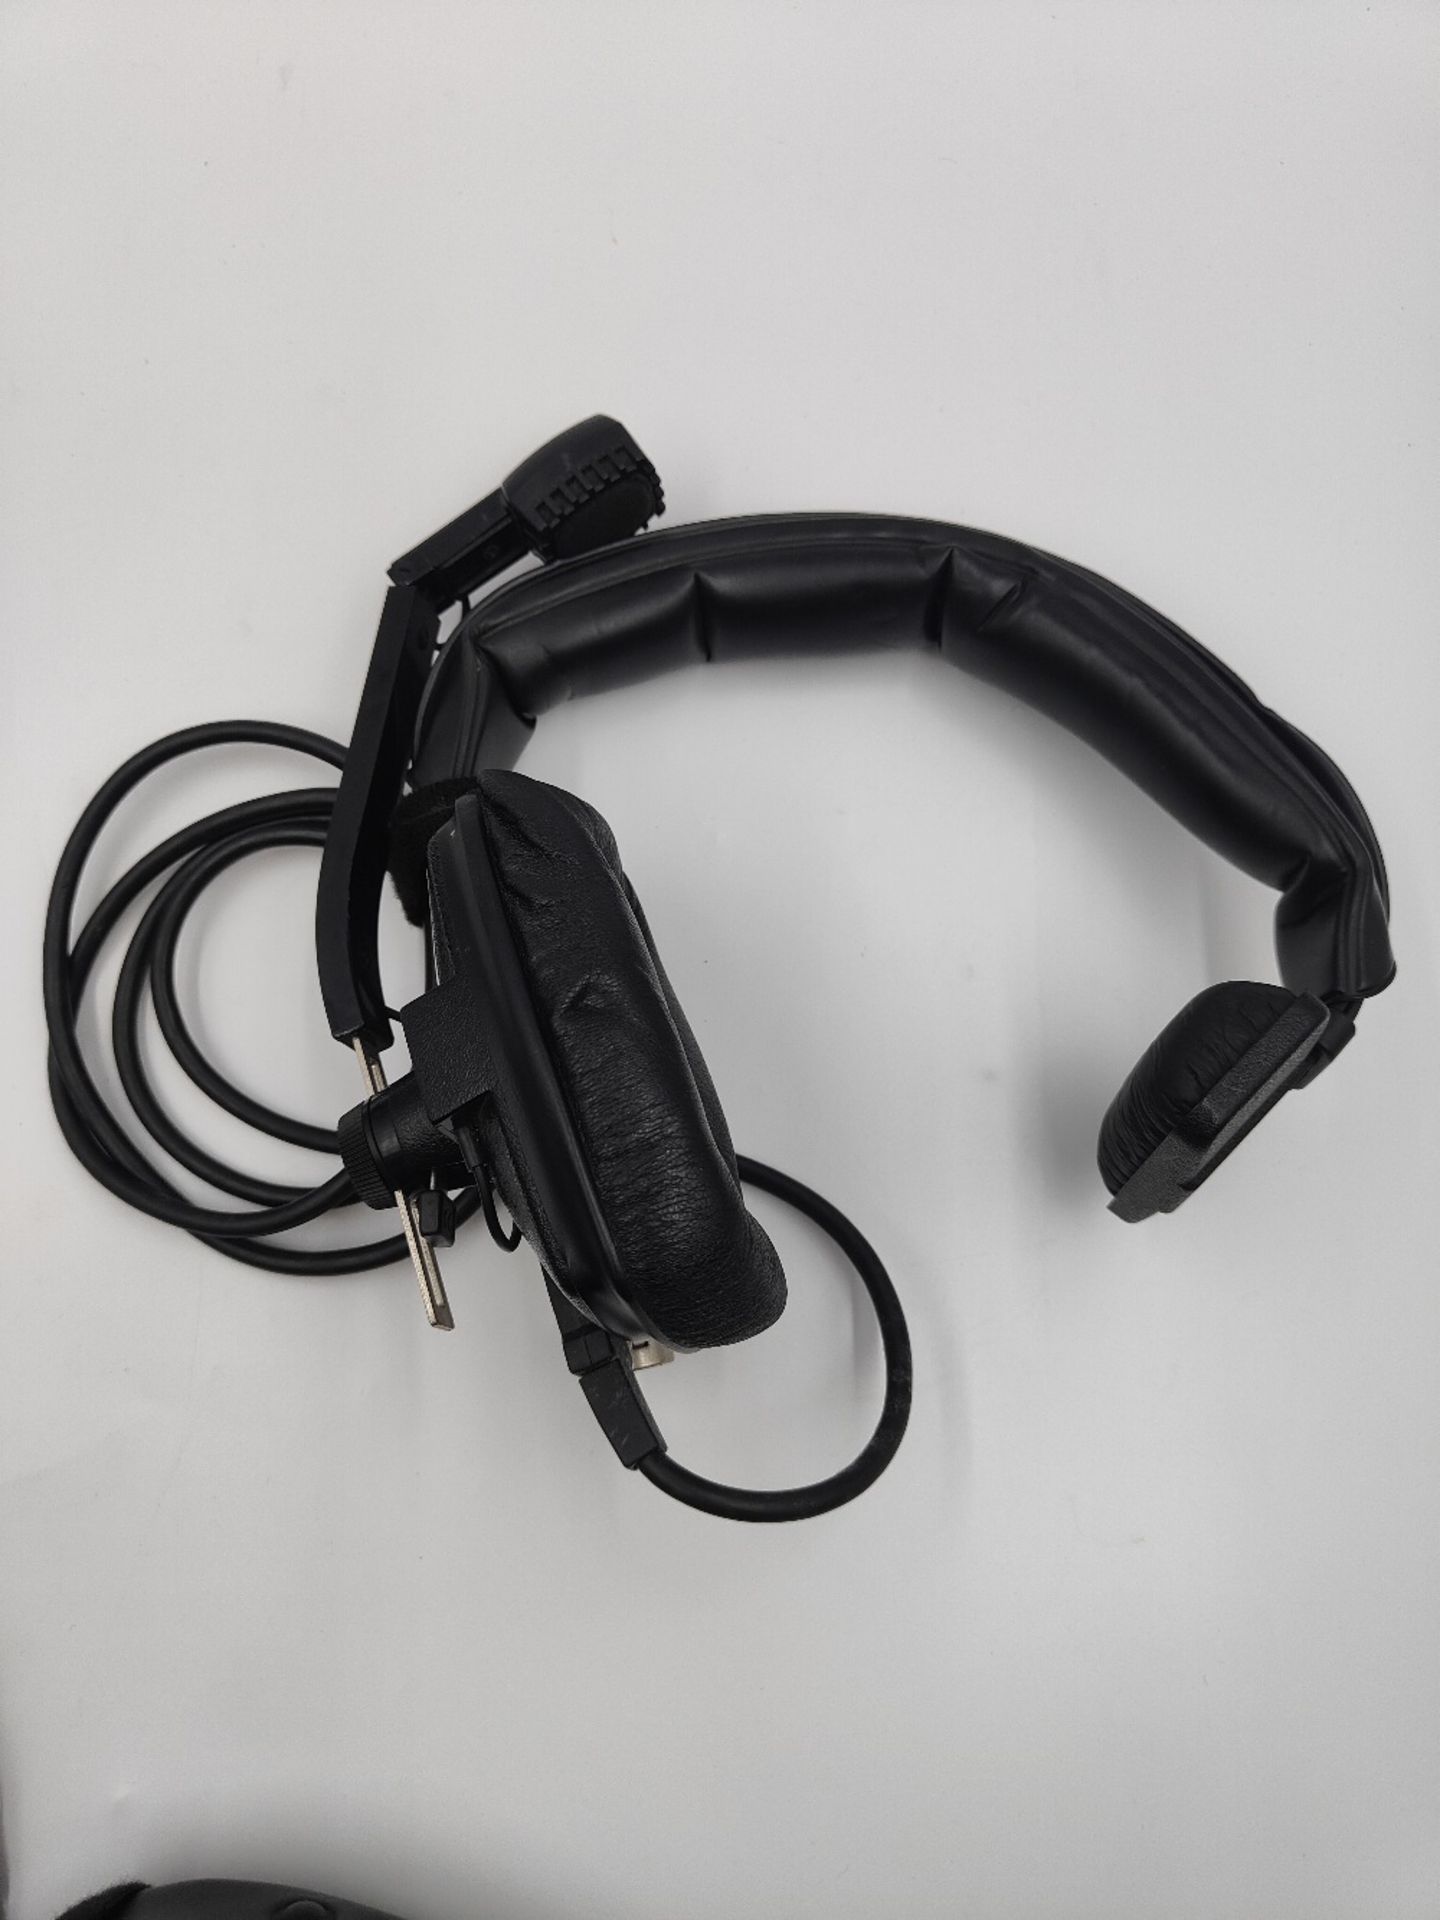 (5) Beyer Dynamic DT108 Comms Headsets - Image 3 of 3